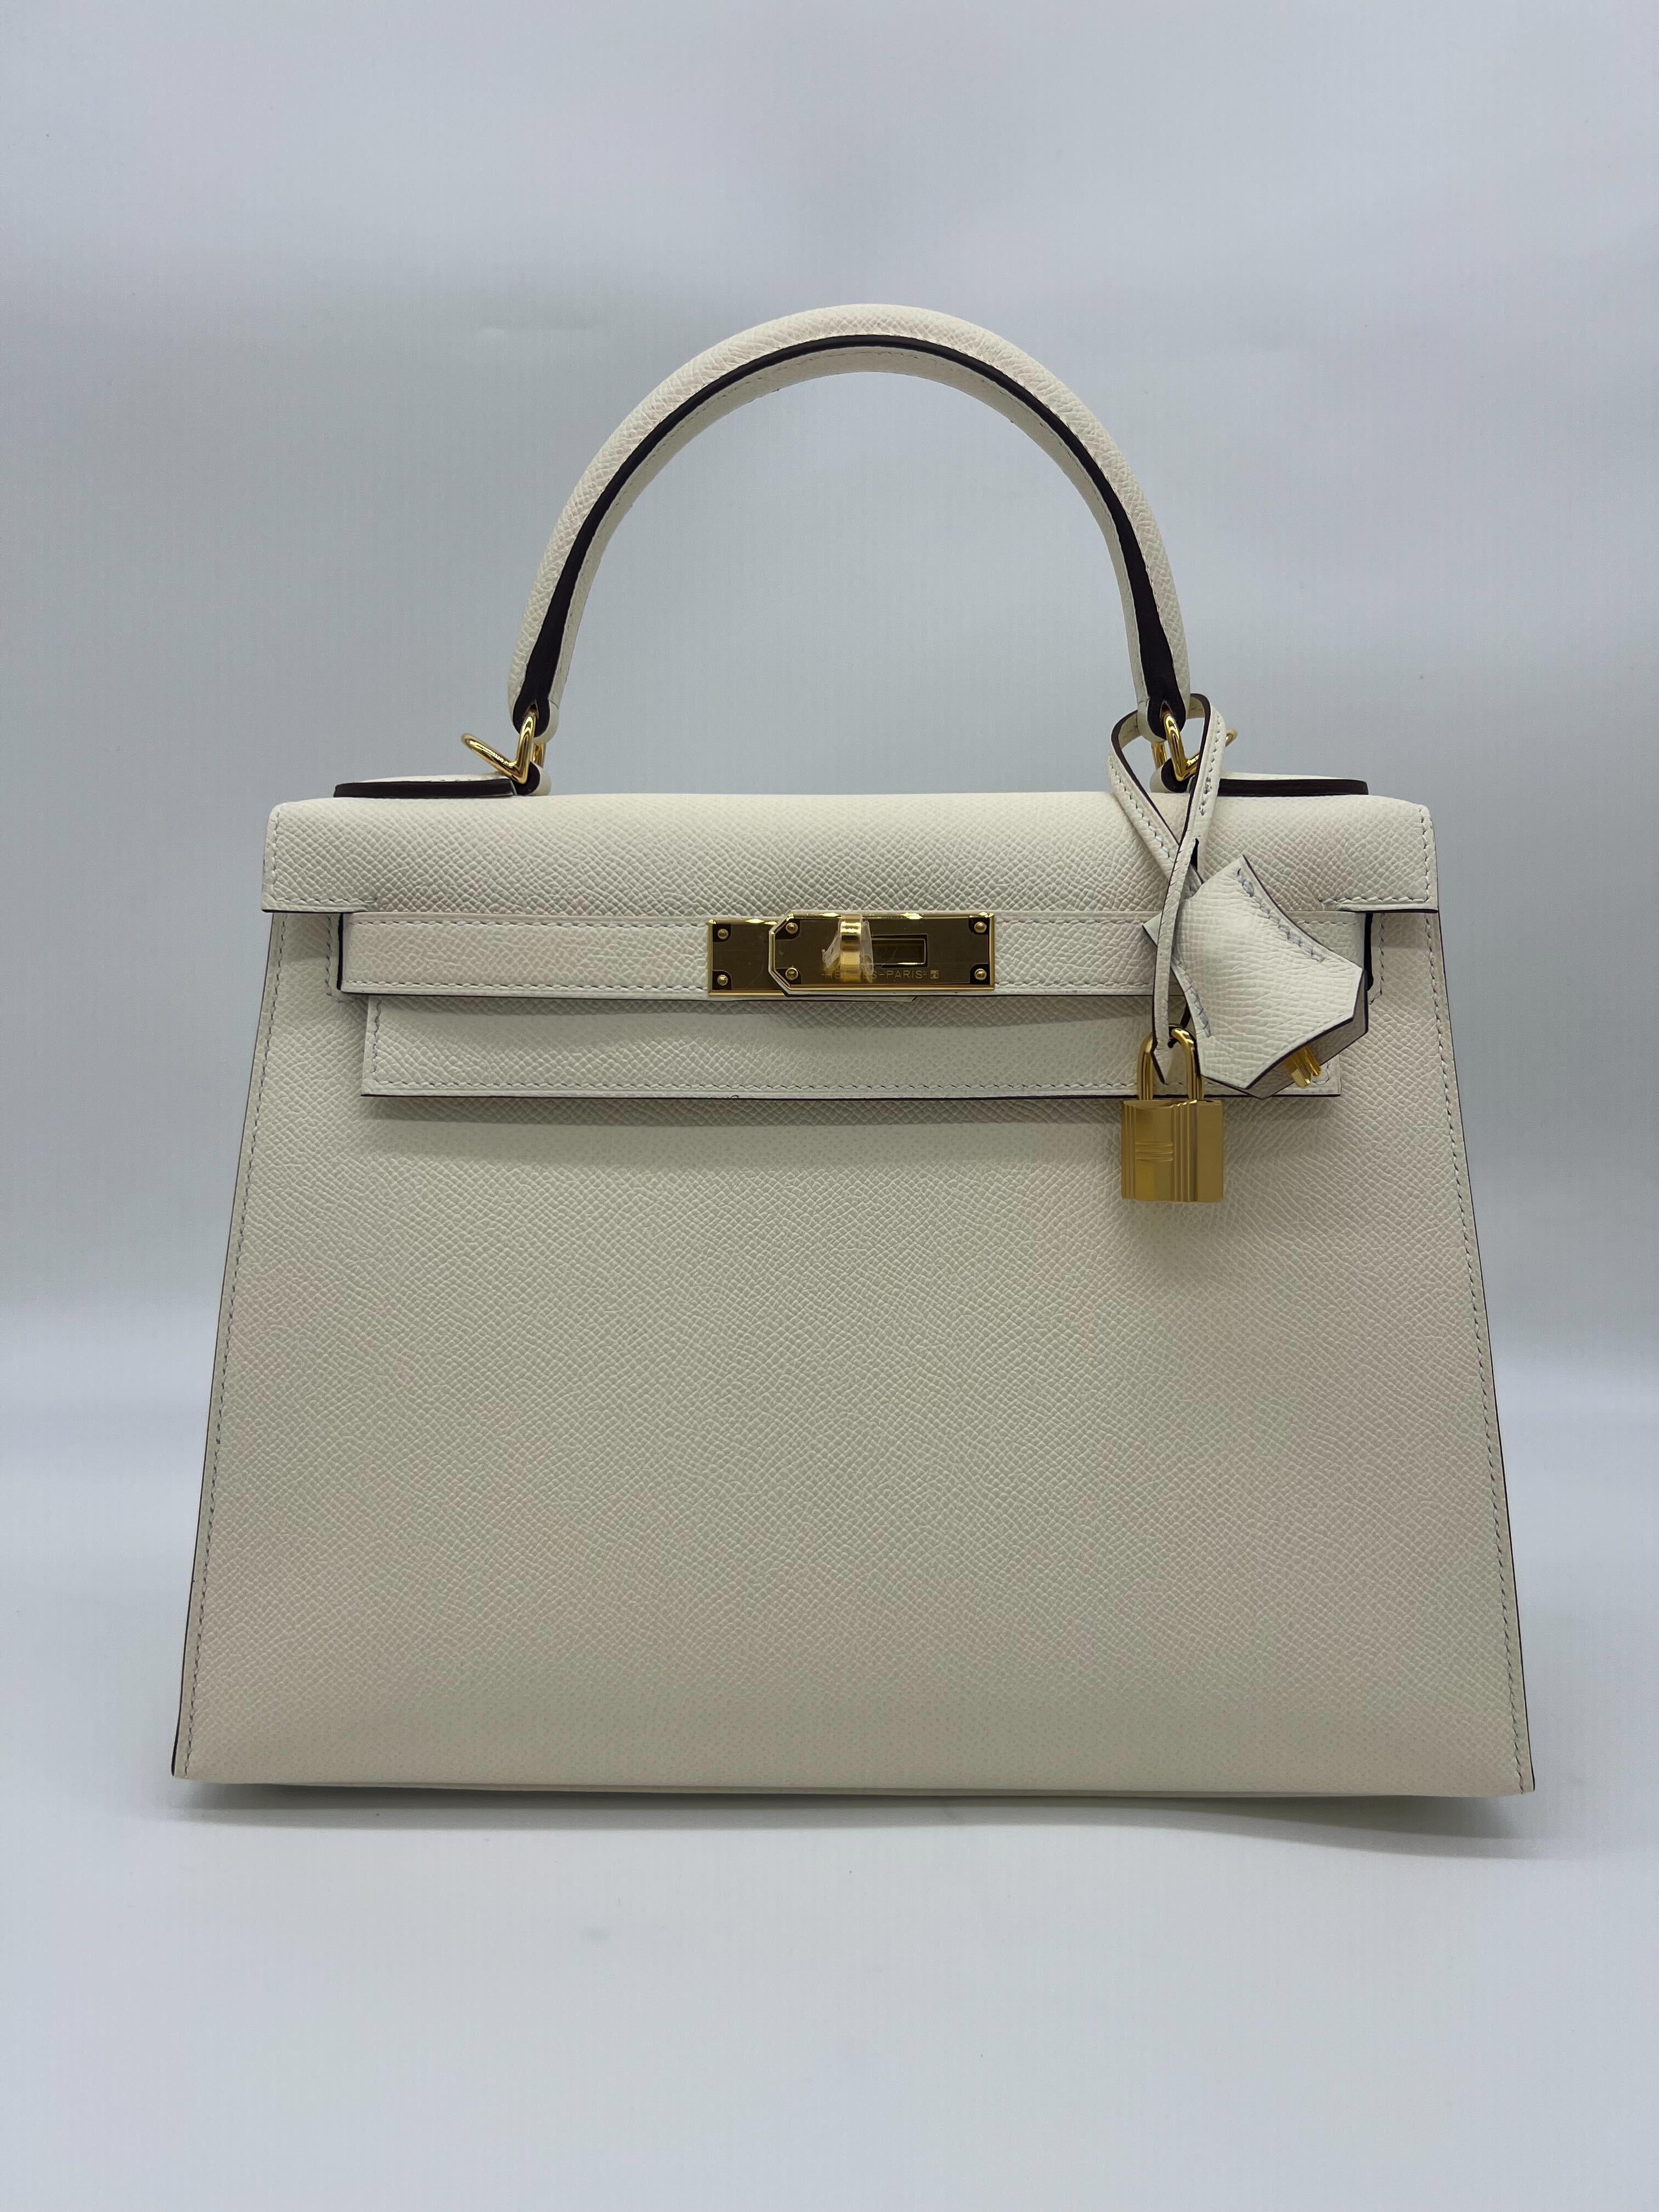 Hermes Kelly II Sellier 28 Nata Epsom Leather Gold Hardware

Condition: Brand New 
Measurements: (H) 22cm (W) 28cm (D) 11 cm
Material: Epsom Leather
Hardware: Gold Plated
 
Comes in full original packaging. 
Includes original Hermes raincover &